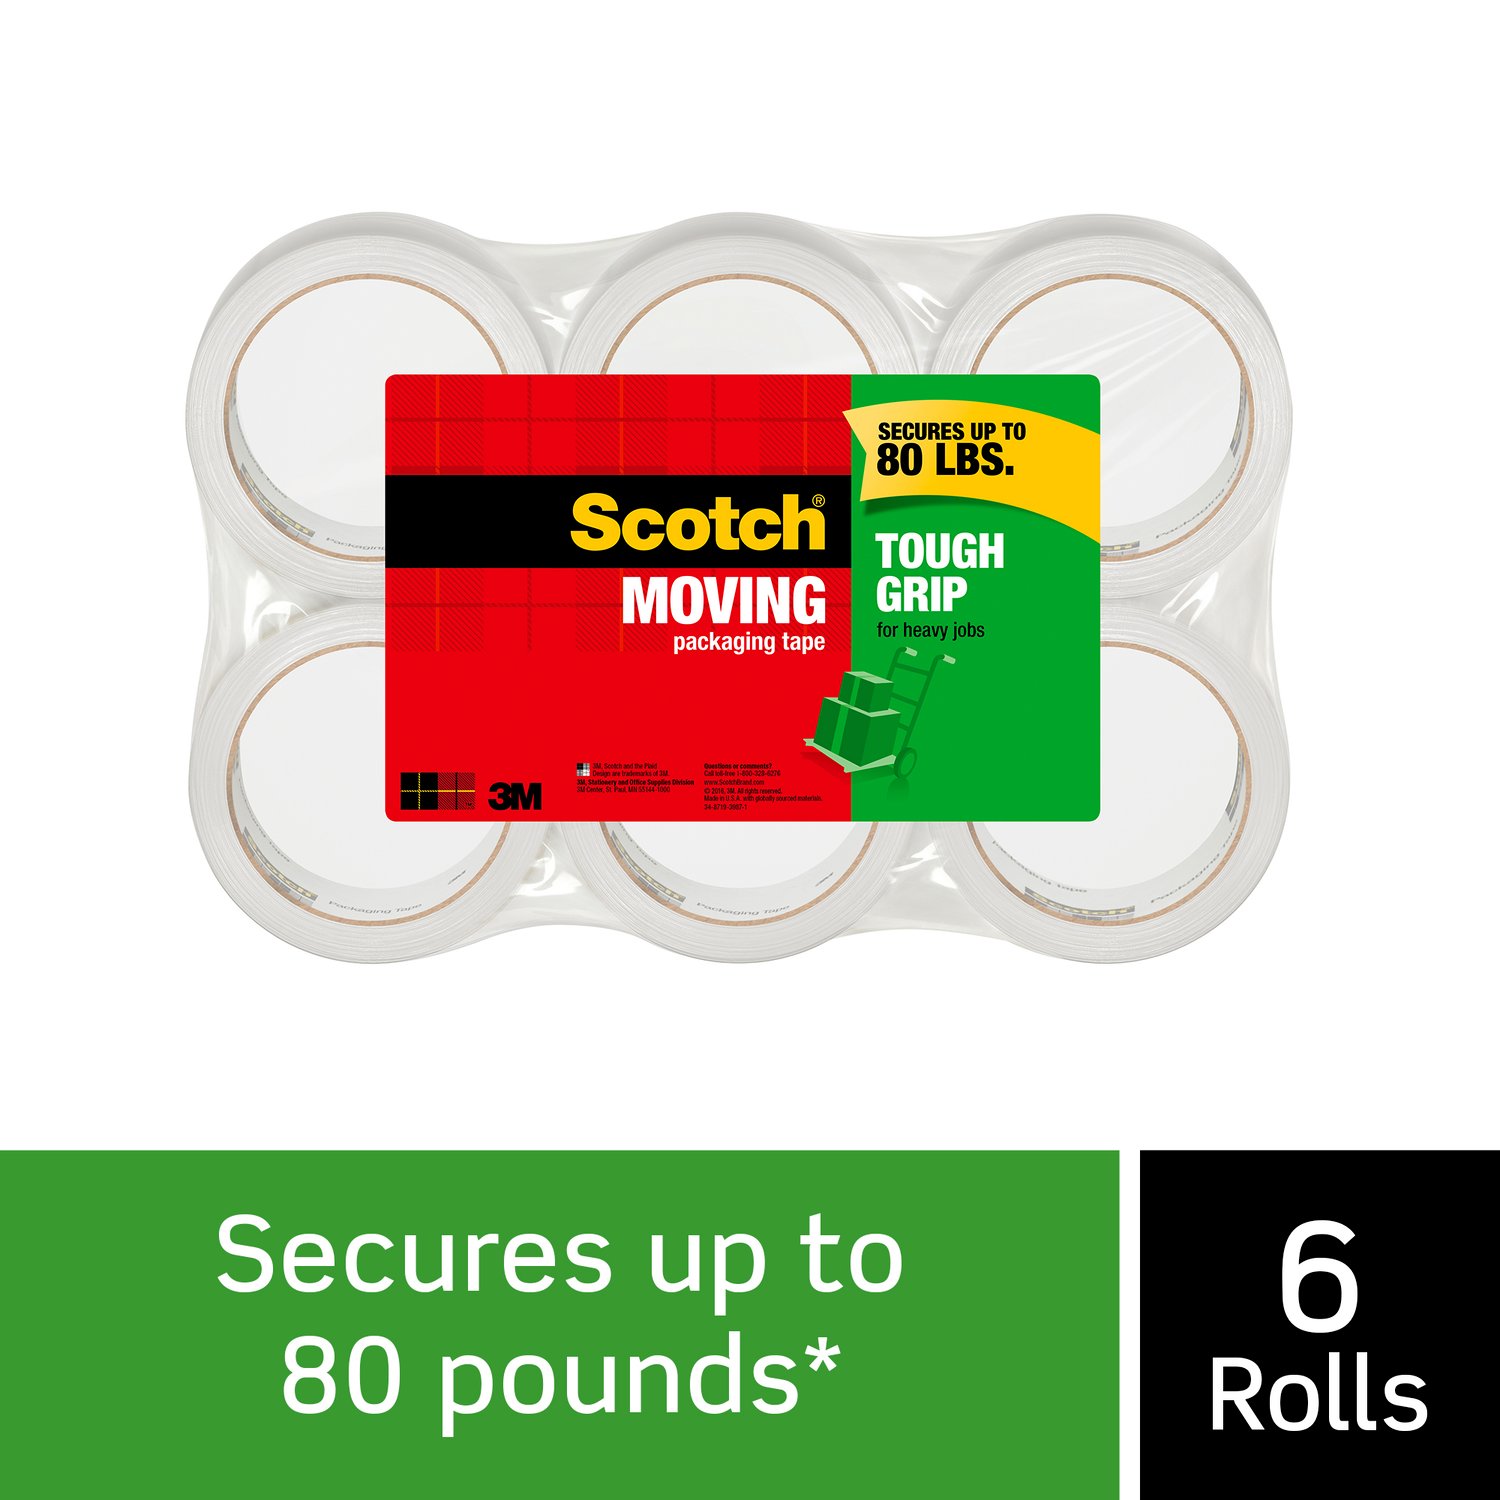 7100103559 - Scotch Tough Grip Moving Packaging Tape 3500-40-6, 1.88 in x 43.7 yd
(48 mm x 40 m)